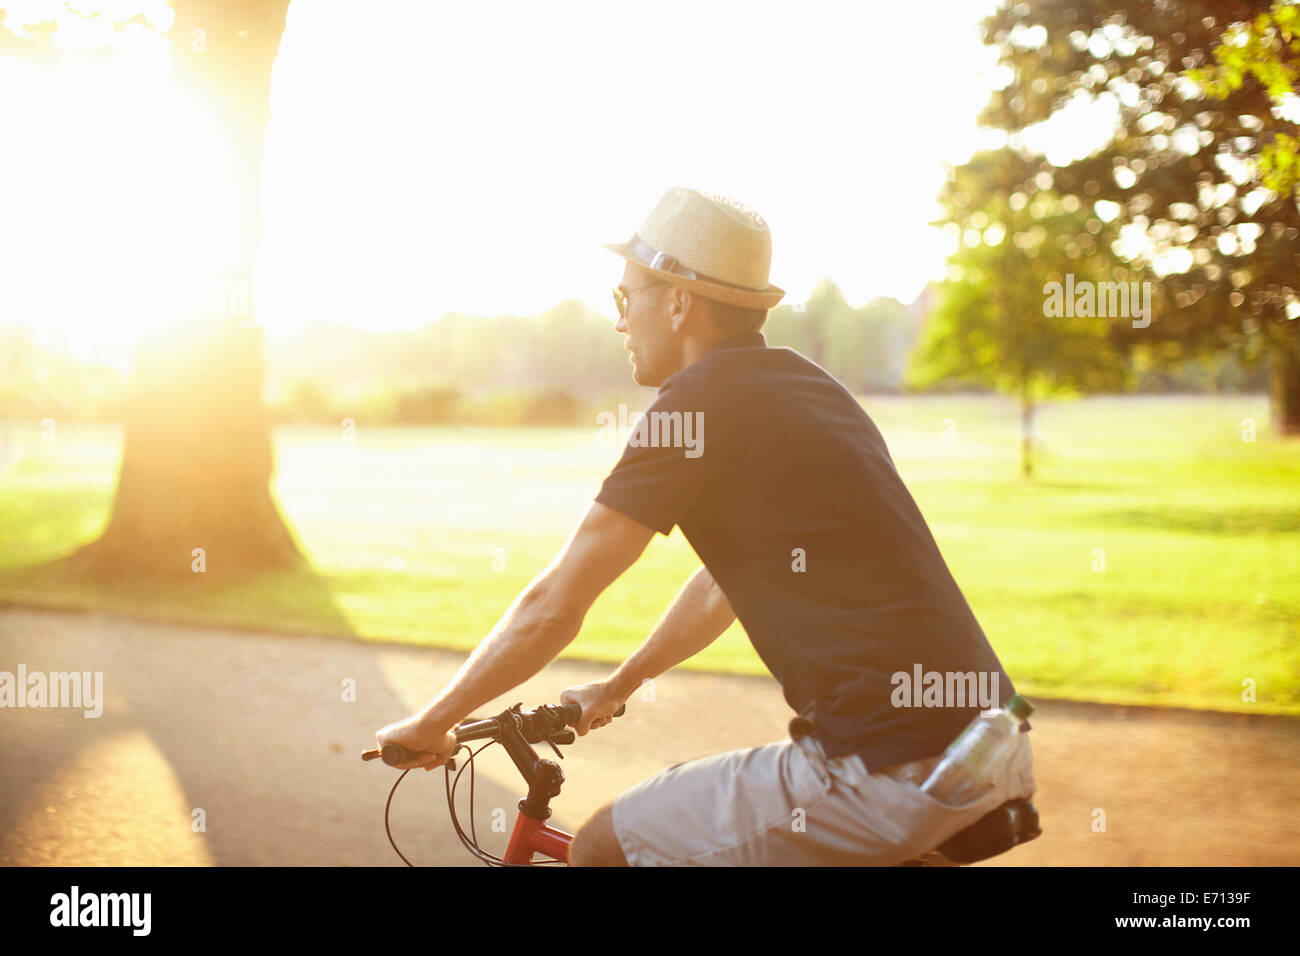 Mid adult man riding bicycle in sunlit park Stock Photo